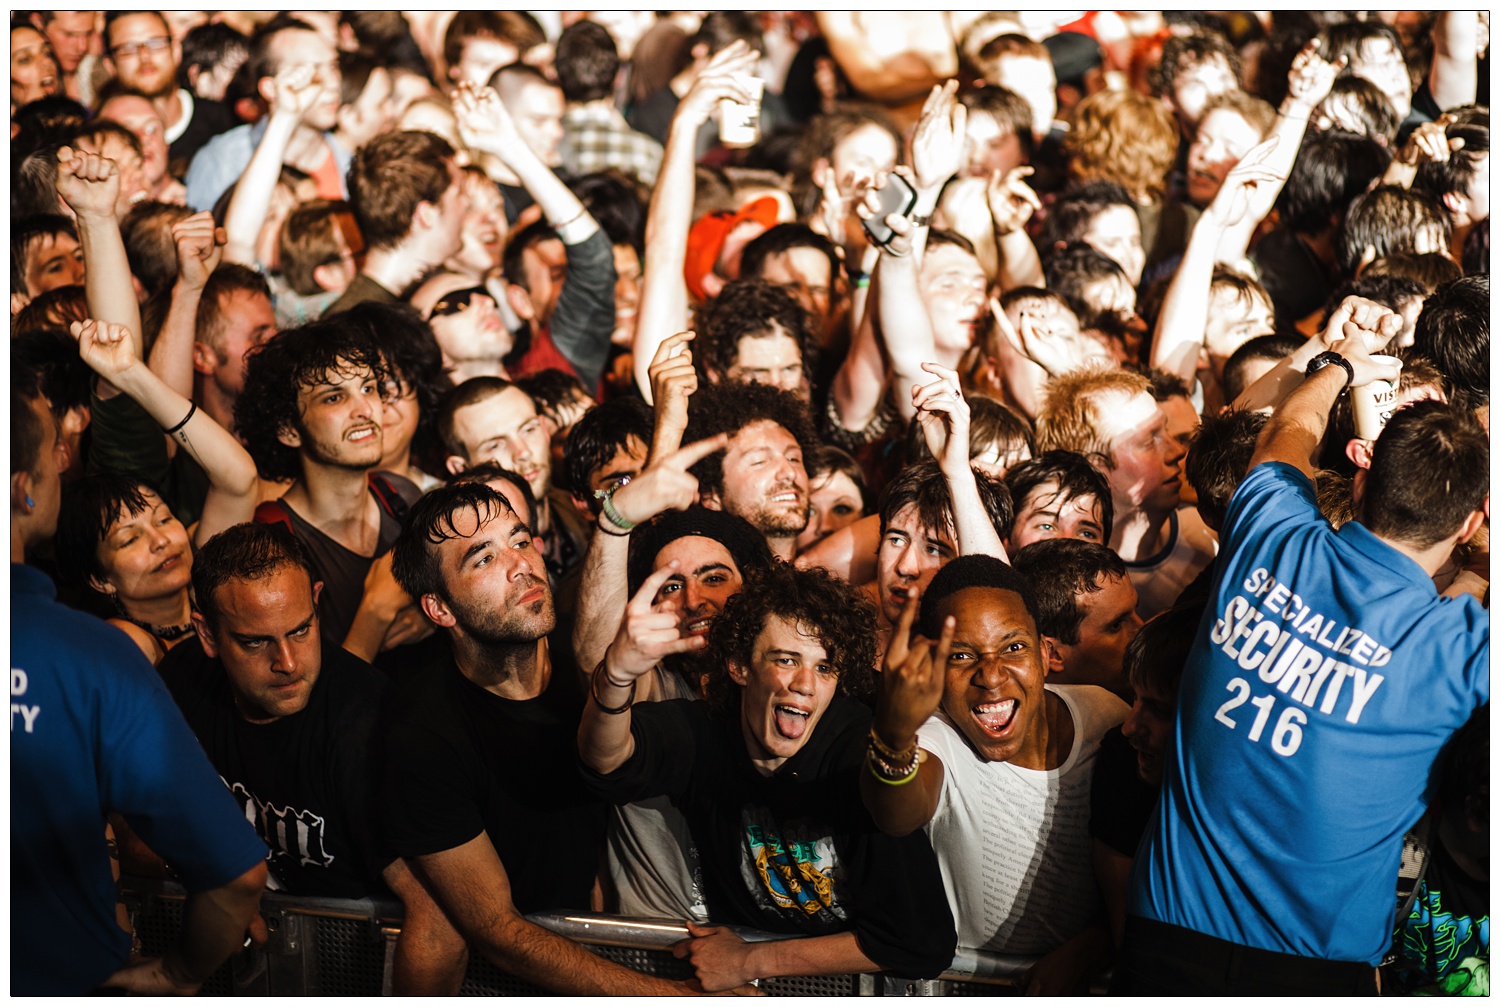 Crowd doing rock fingers at the camera and security at RATM gig in 2010